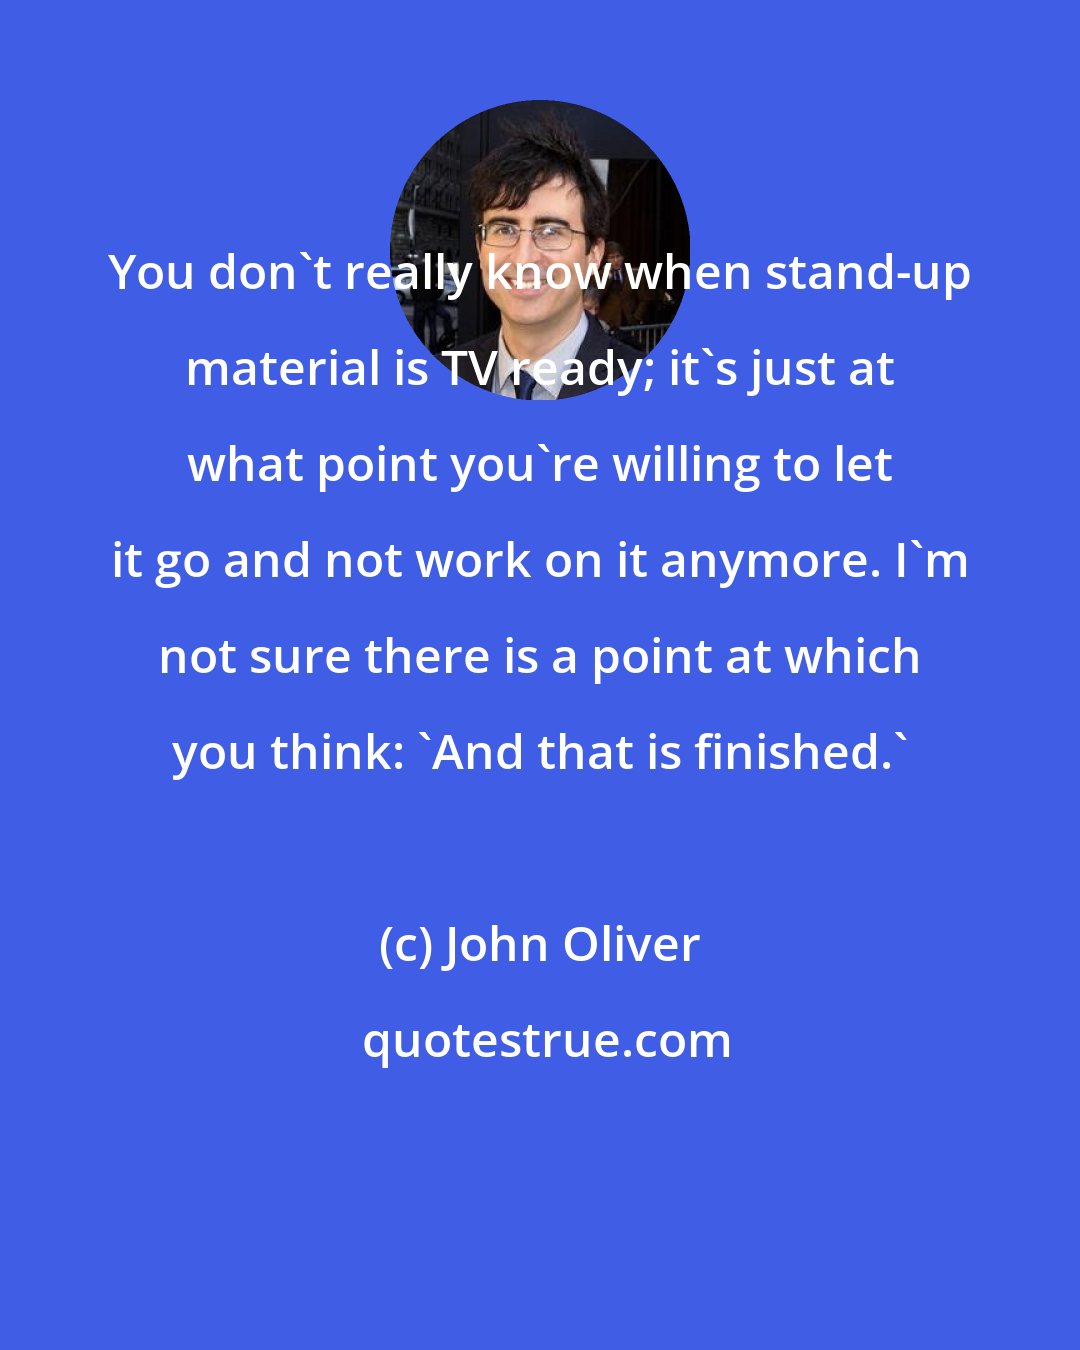 John Oliver: You don't really know when stand-up material is TV ready; it's just at what point you're willing to let it go and not work on it anymore. I'm not sure there is a point at which you think: 'And that is finished.'